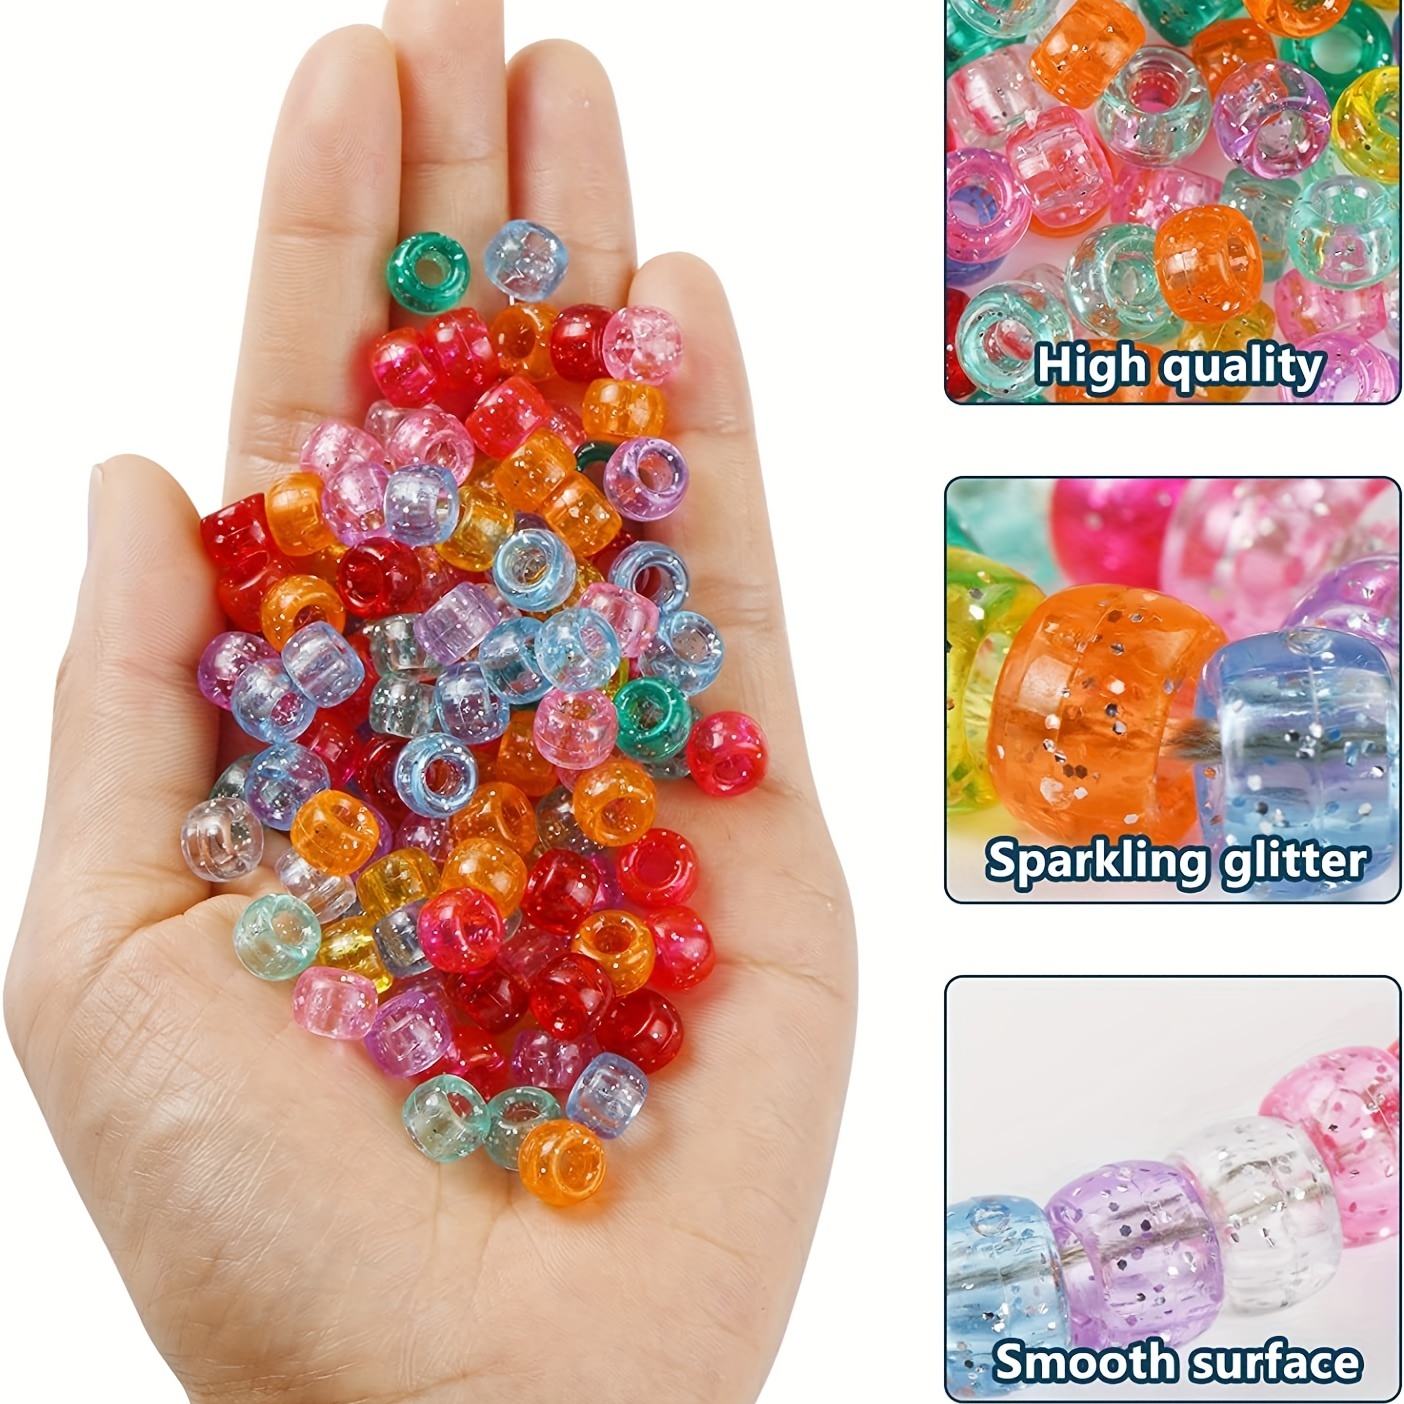 Create Red Plastic pony beads 500 Pack